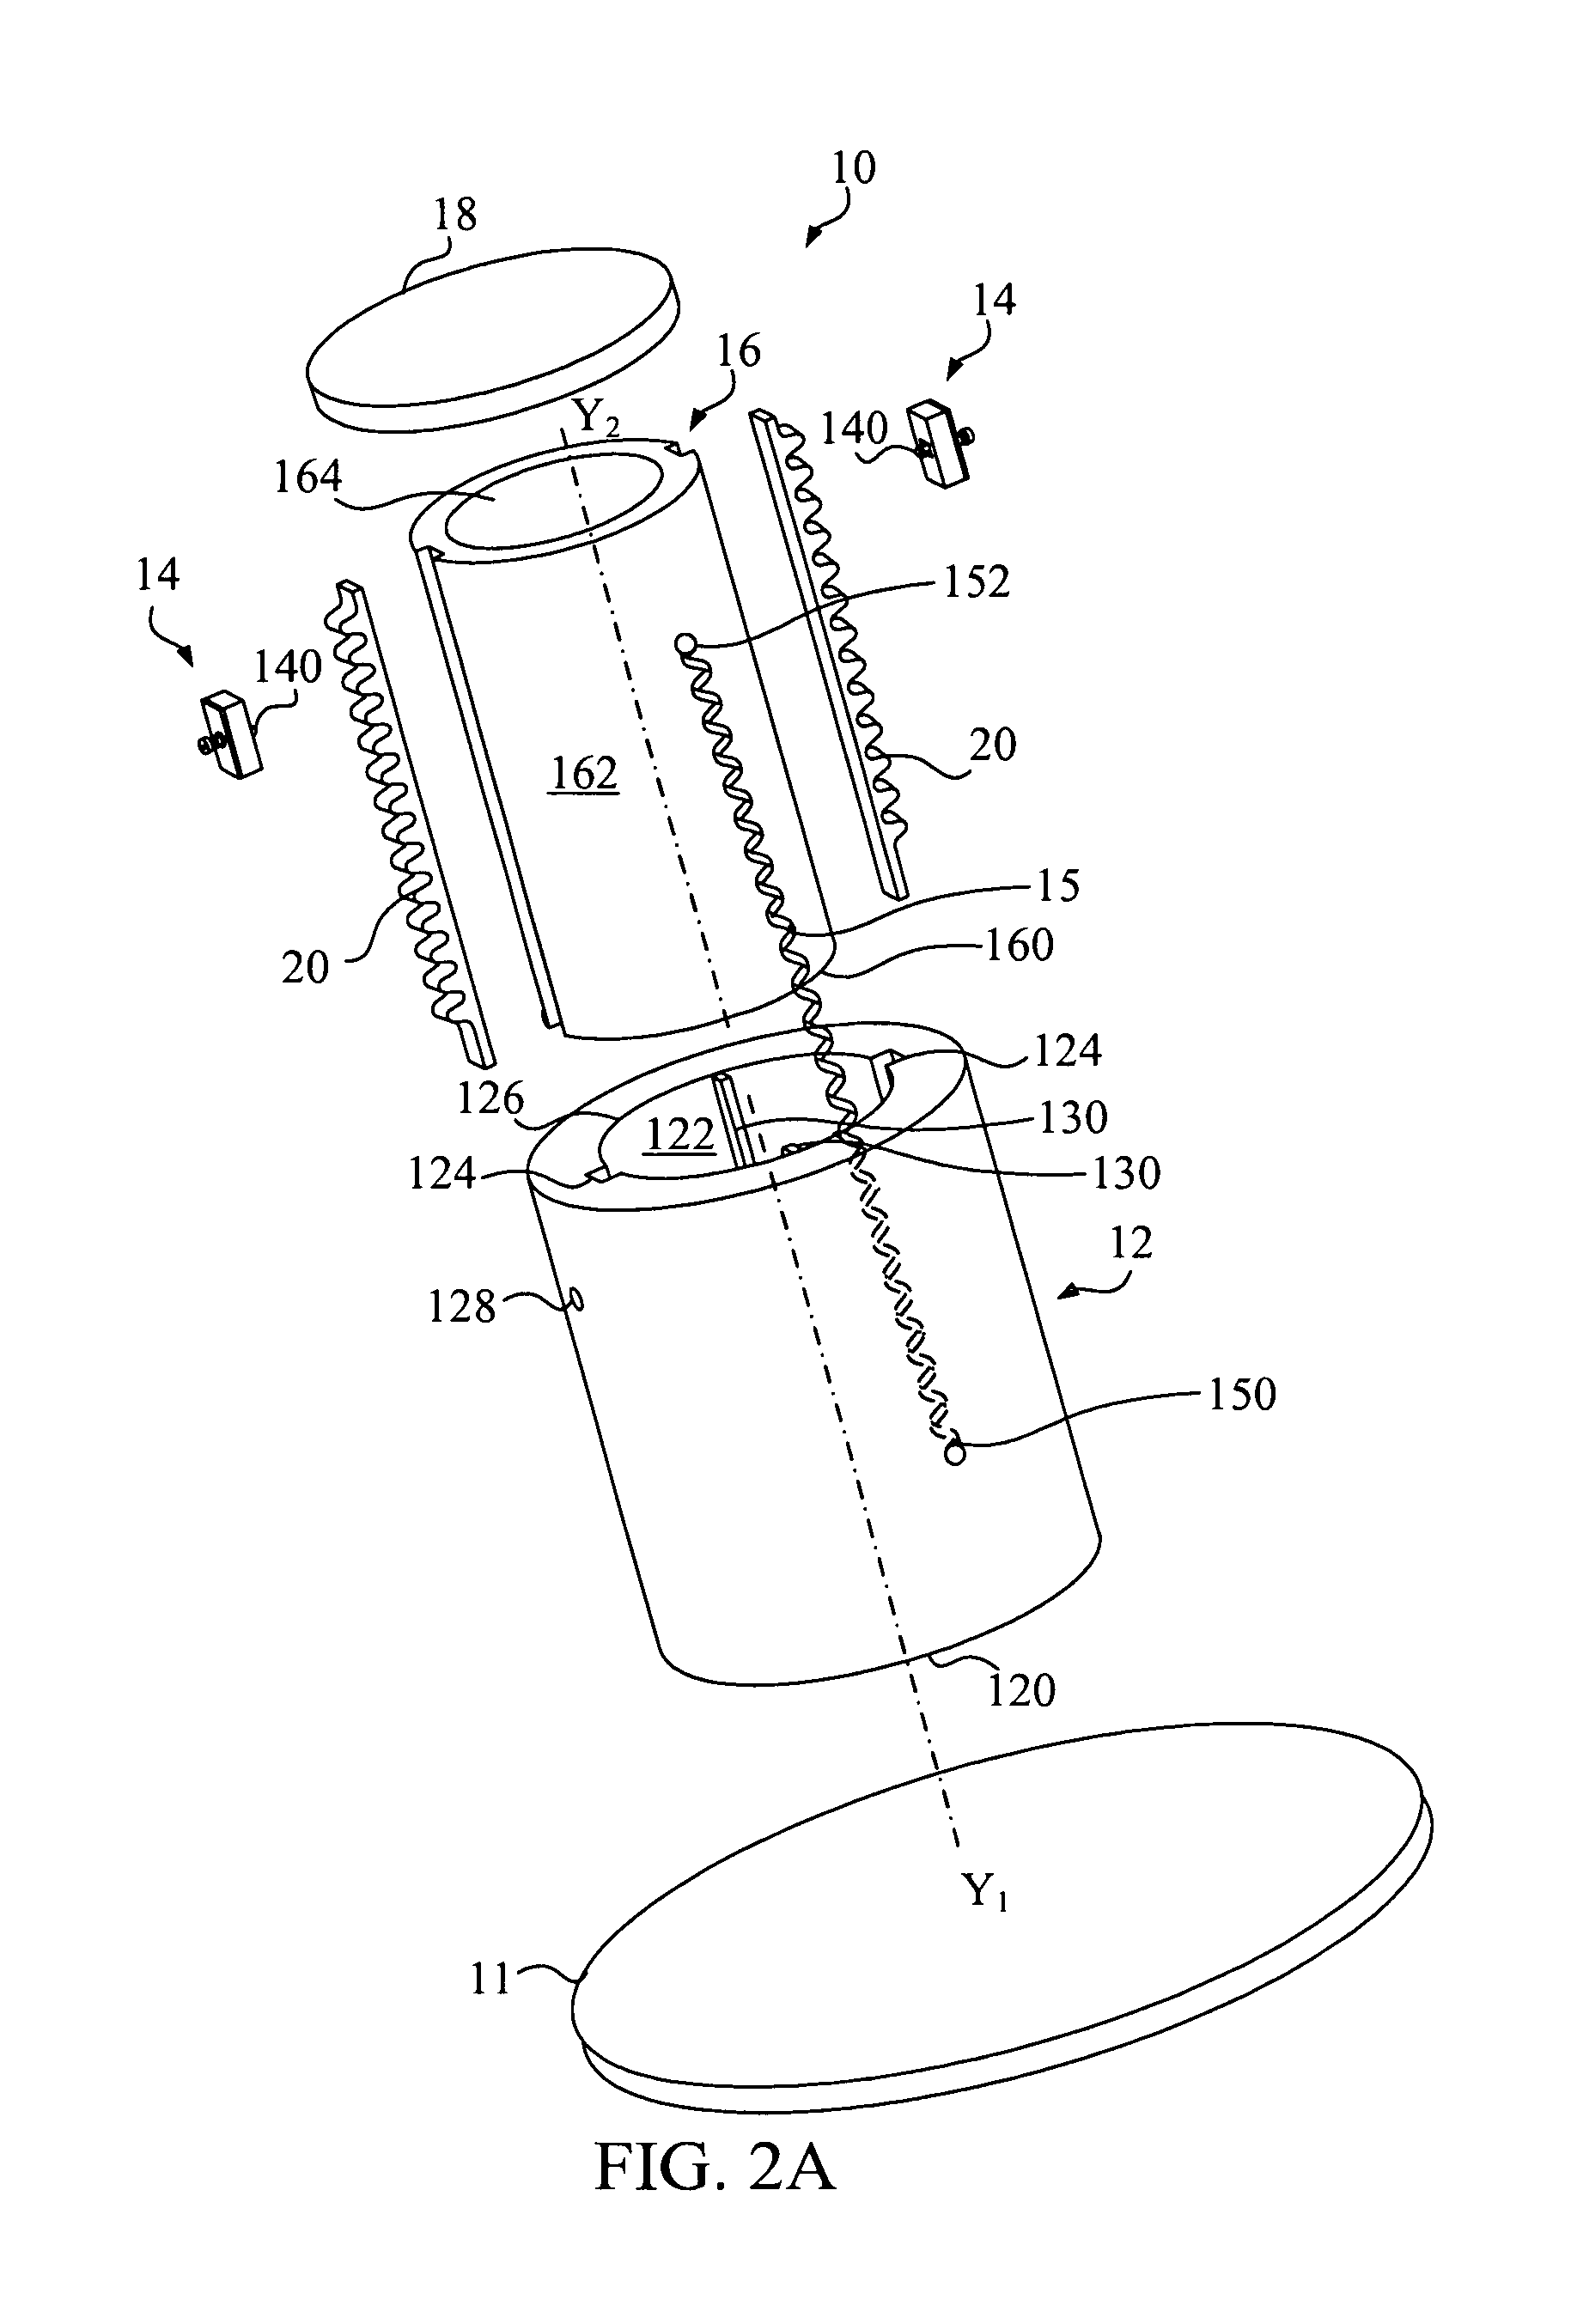 Adjustable lift support apparatus